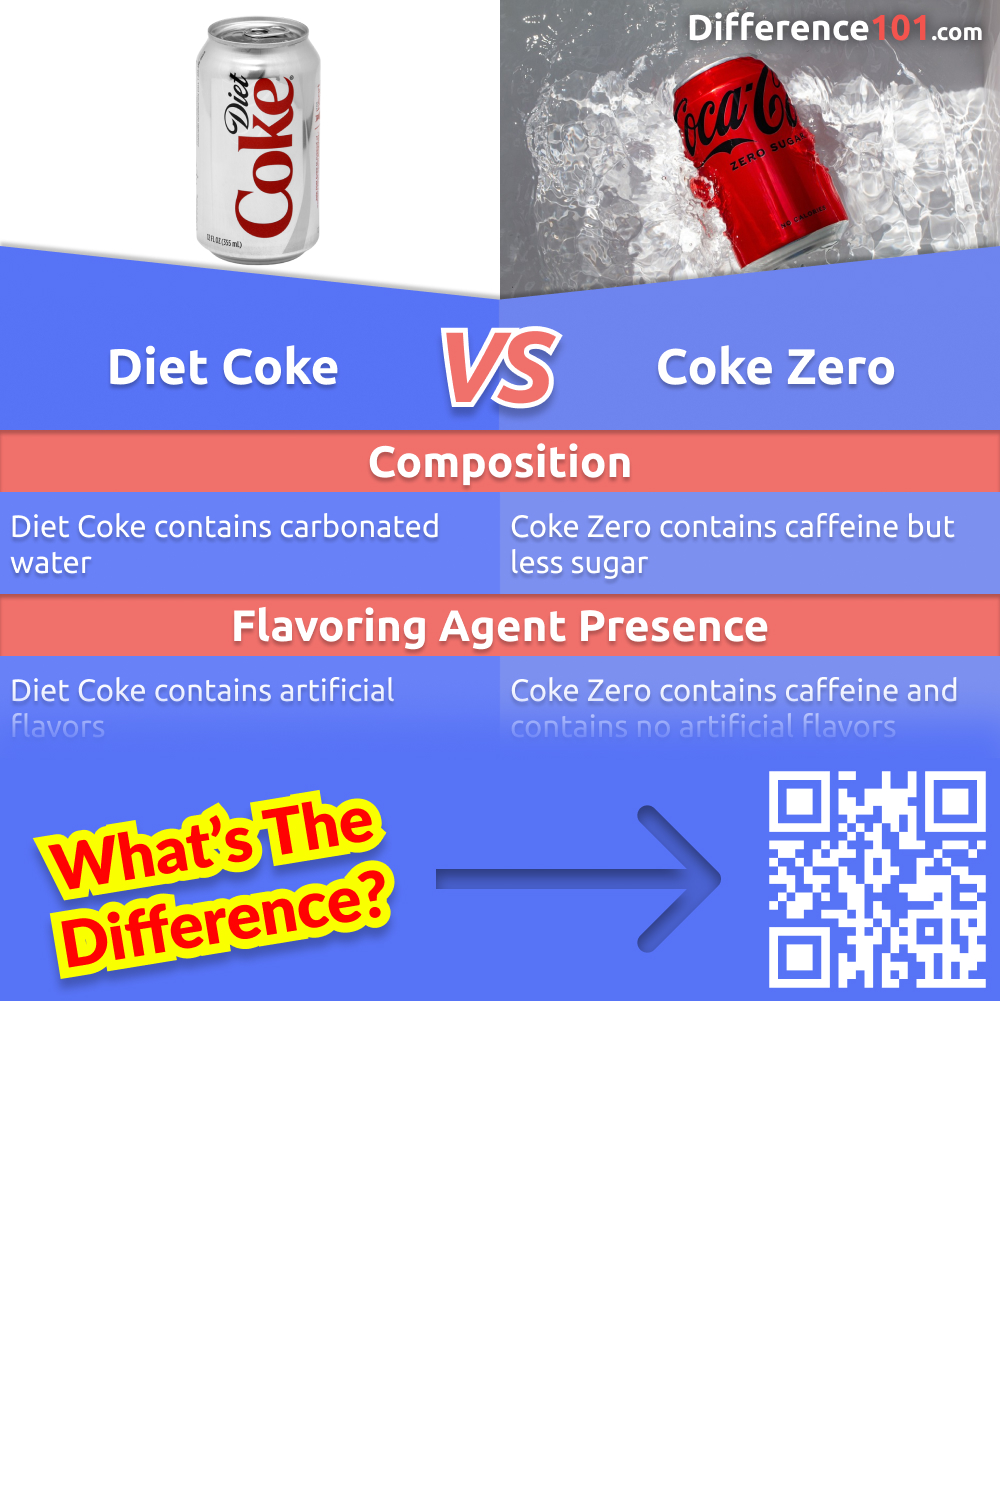 Diet Coke and Coke Zero are two of the most popular sugar-free soft drinks. But what are the differences between them? This article will compare the two drinks, looking at their pros and cons. Read more here.